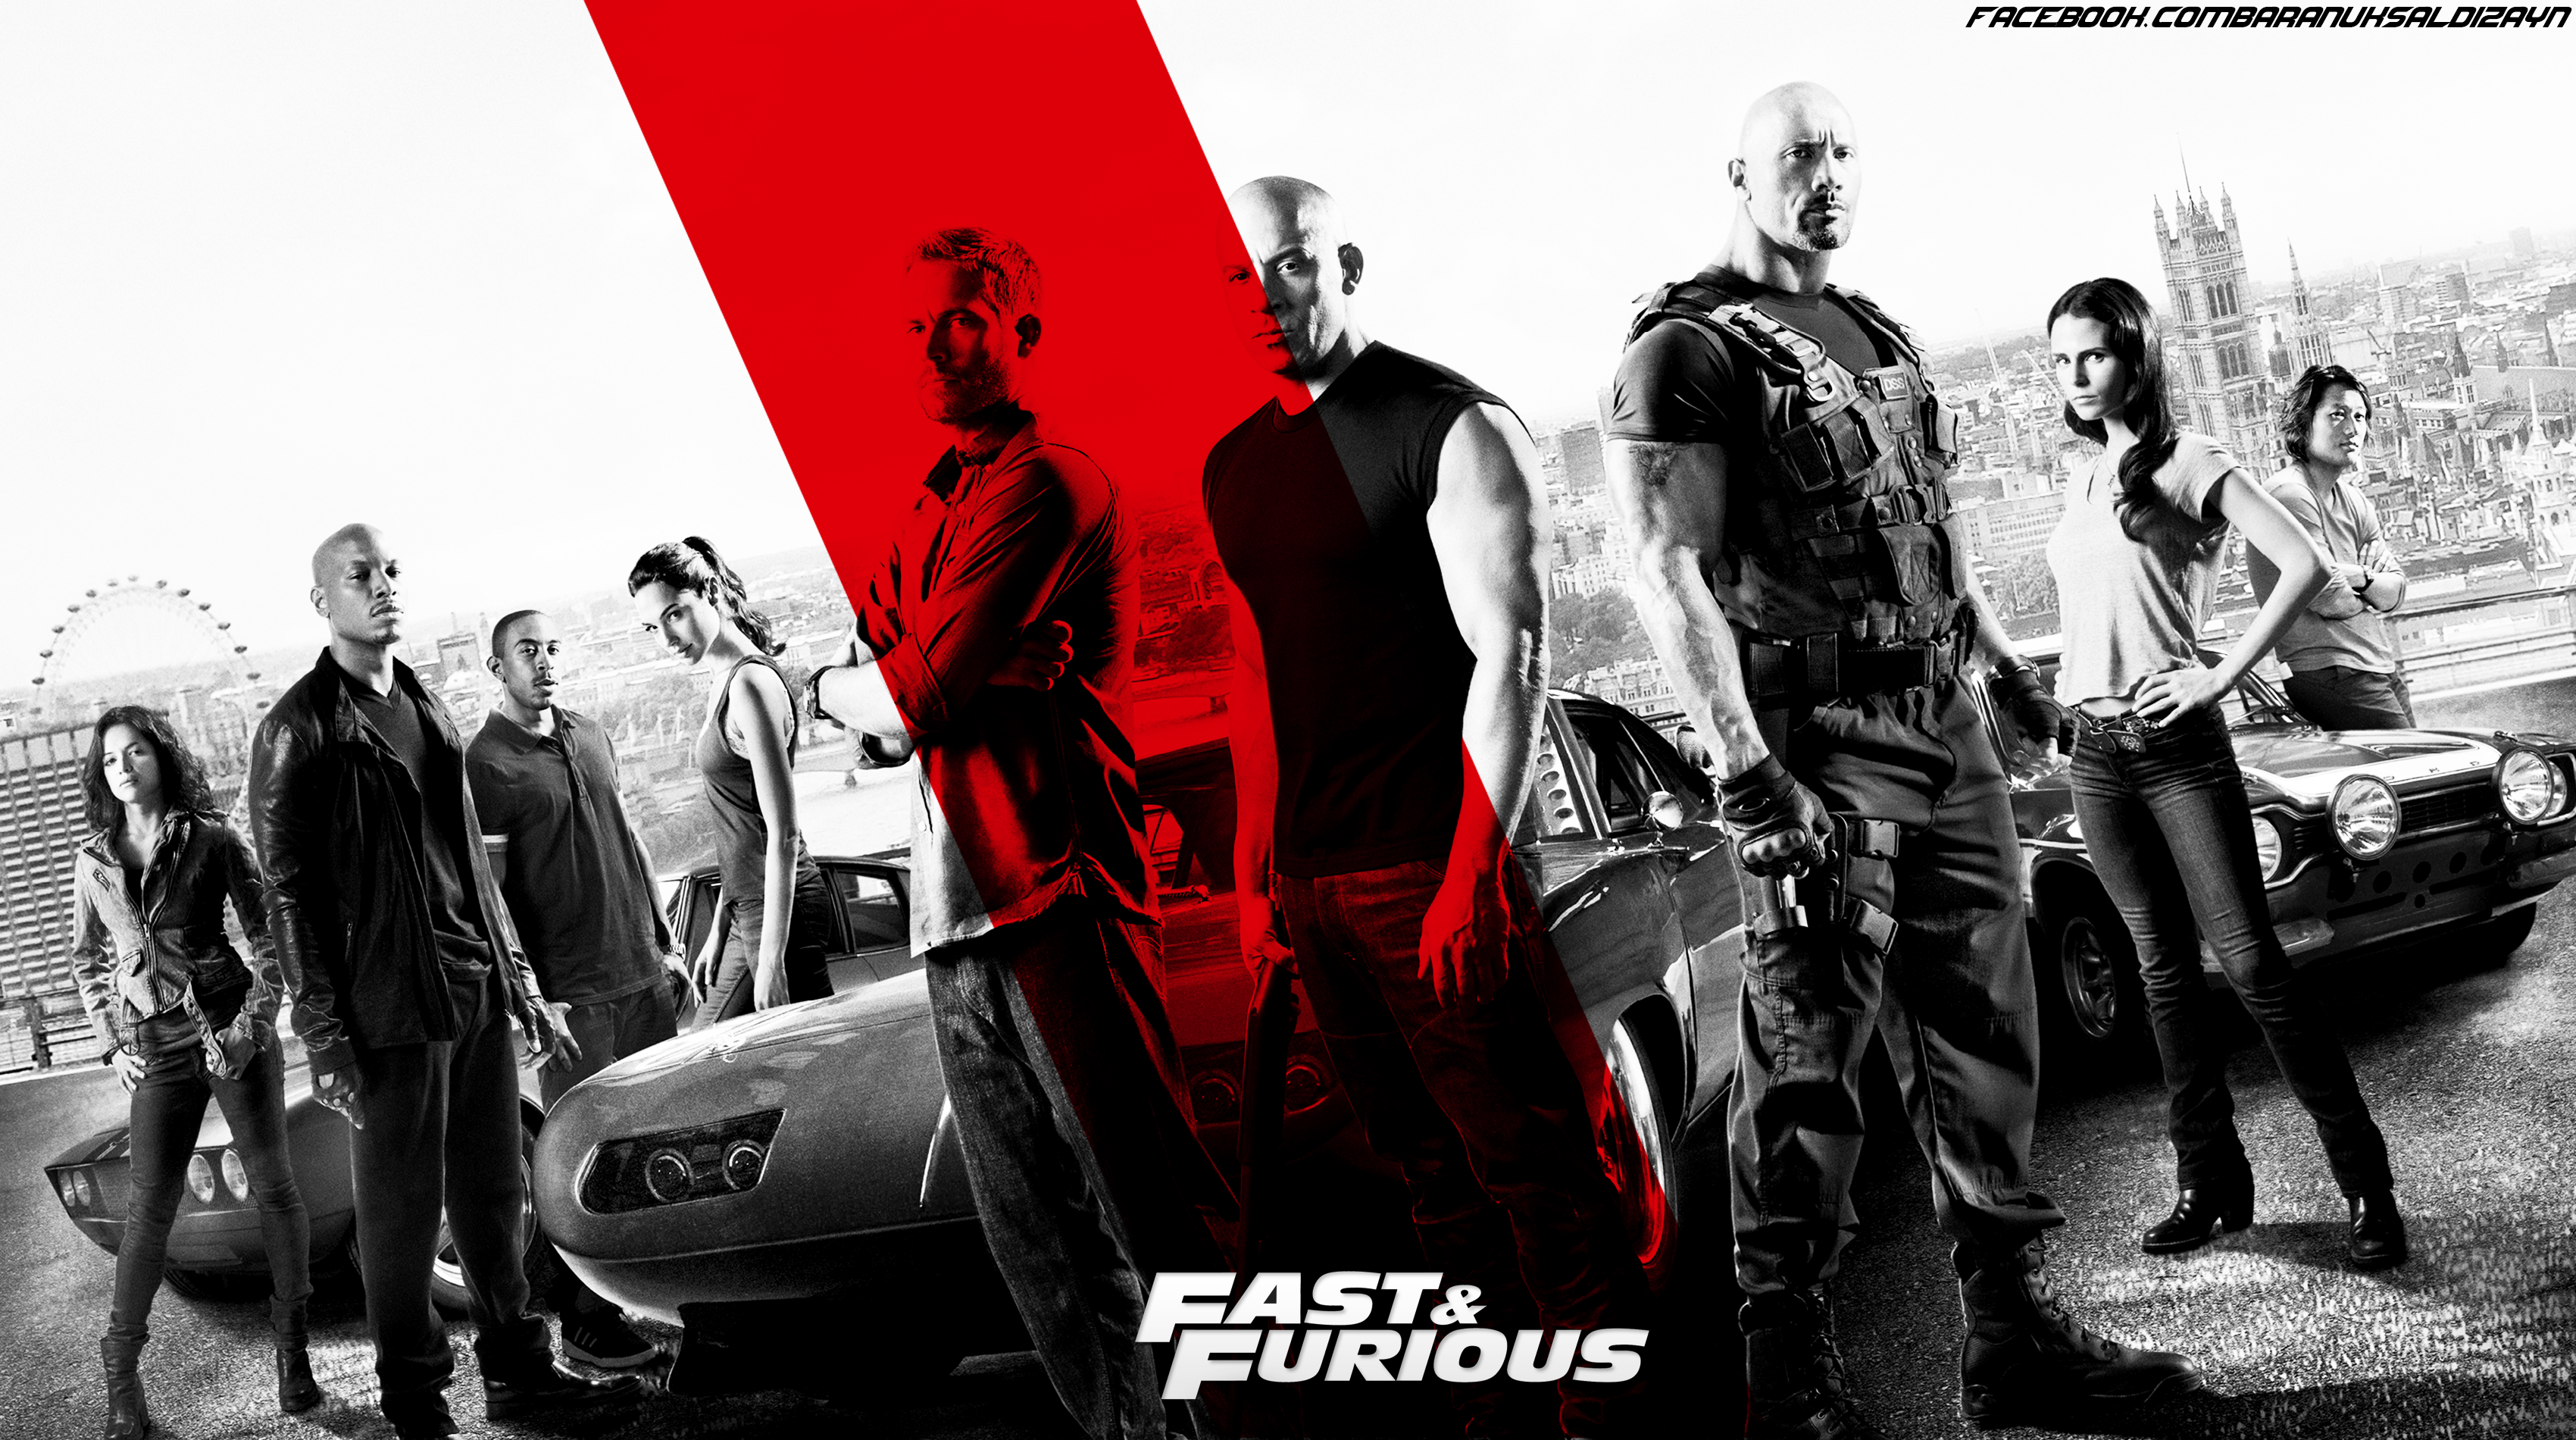 Fast and Furious 4 Wallpaper. Fast Cars Wallpaper, Fast Food Wallpaper and Fast Wallpaper